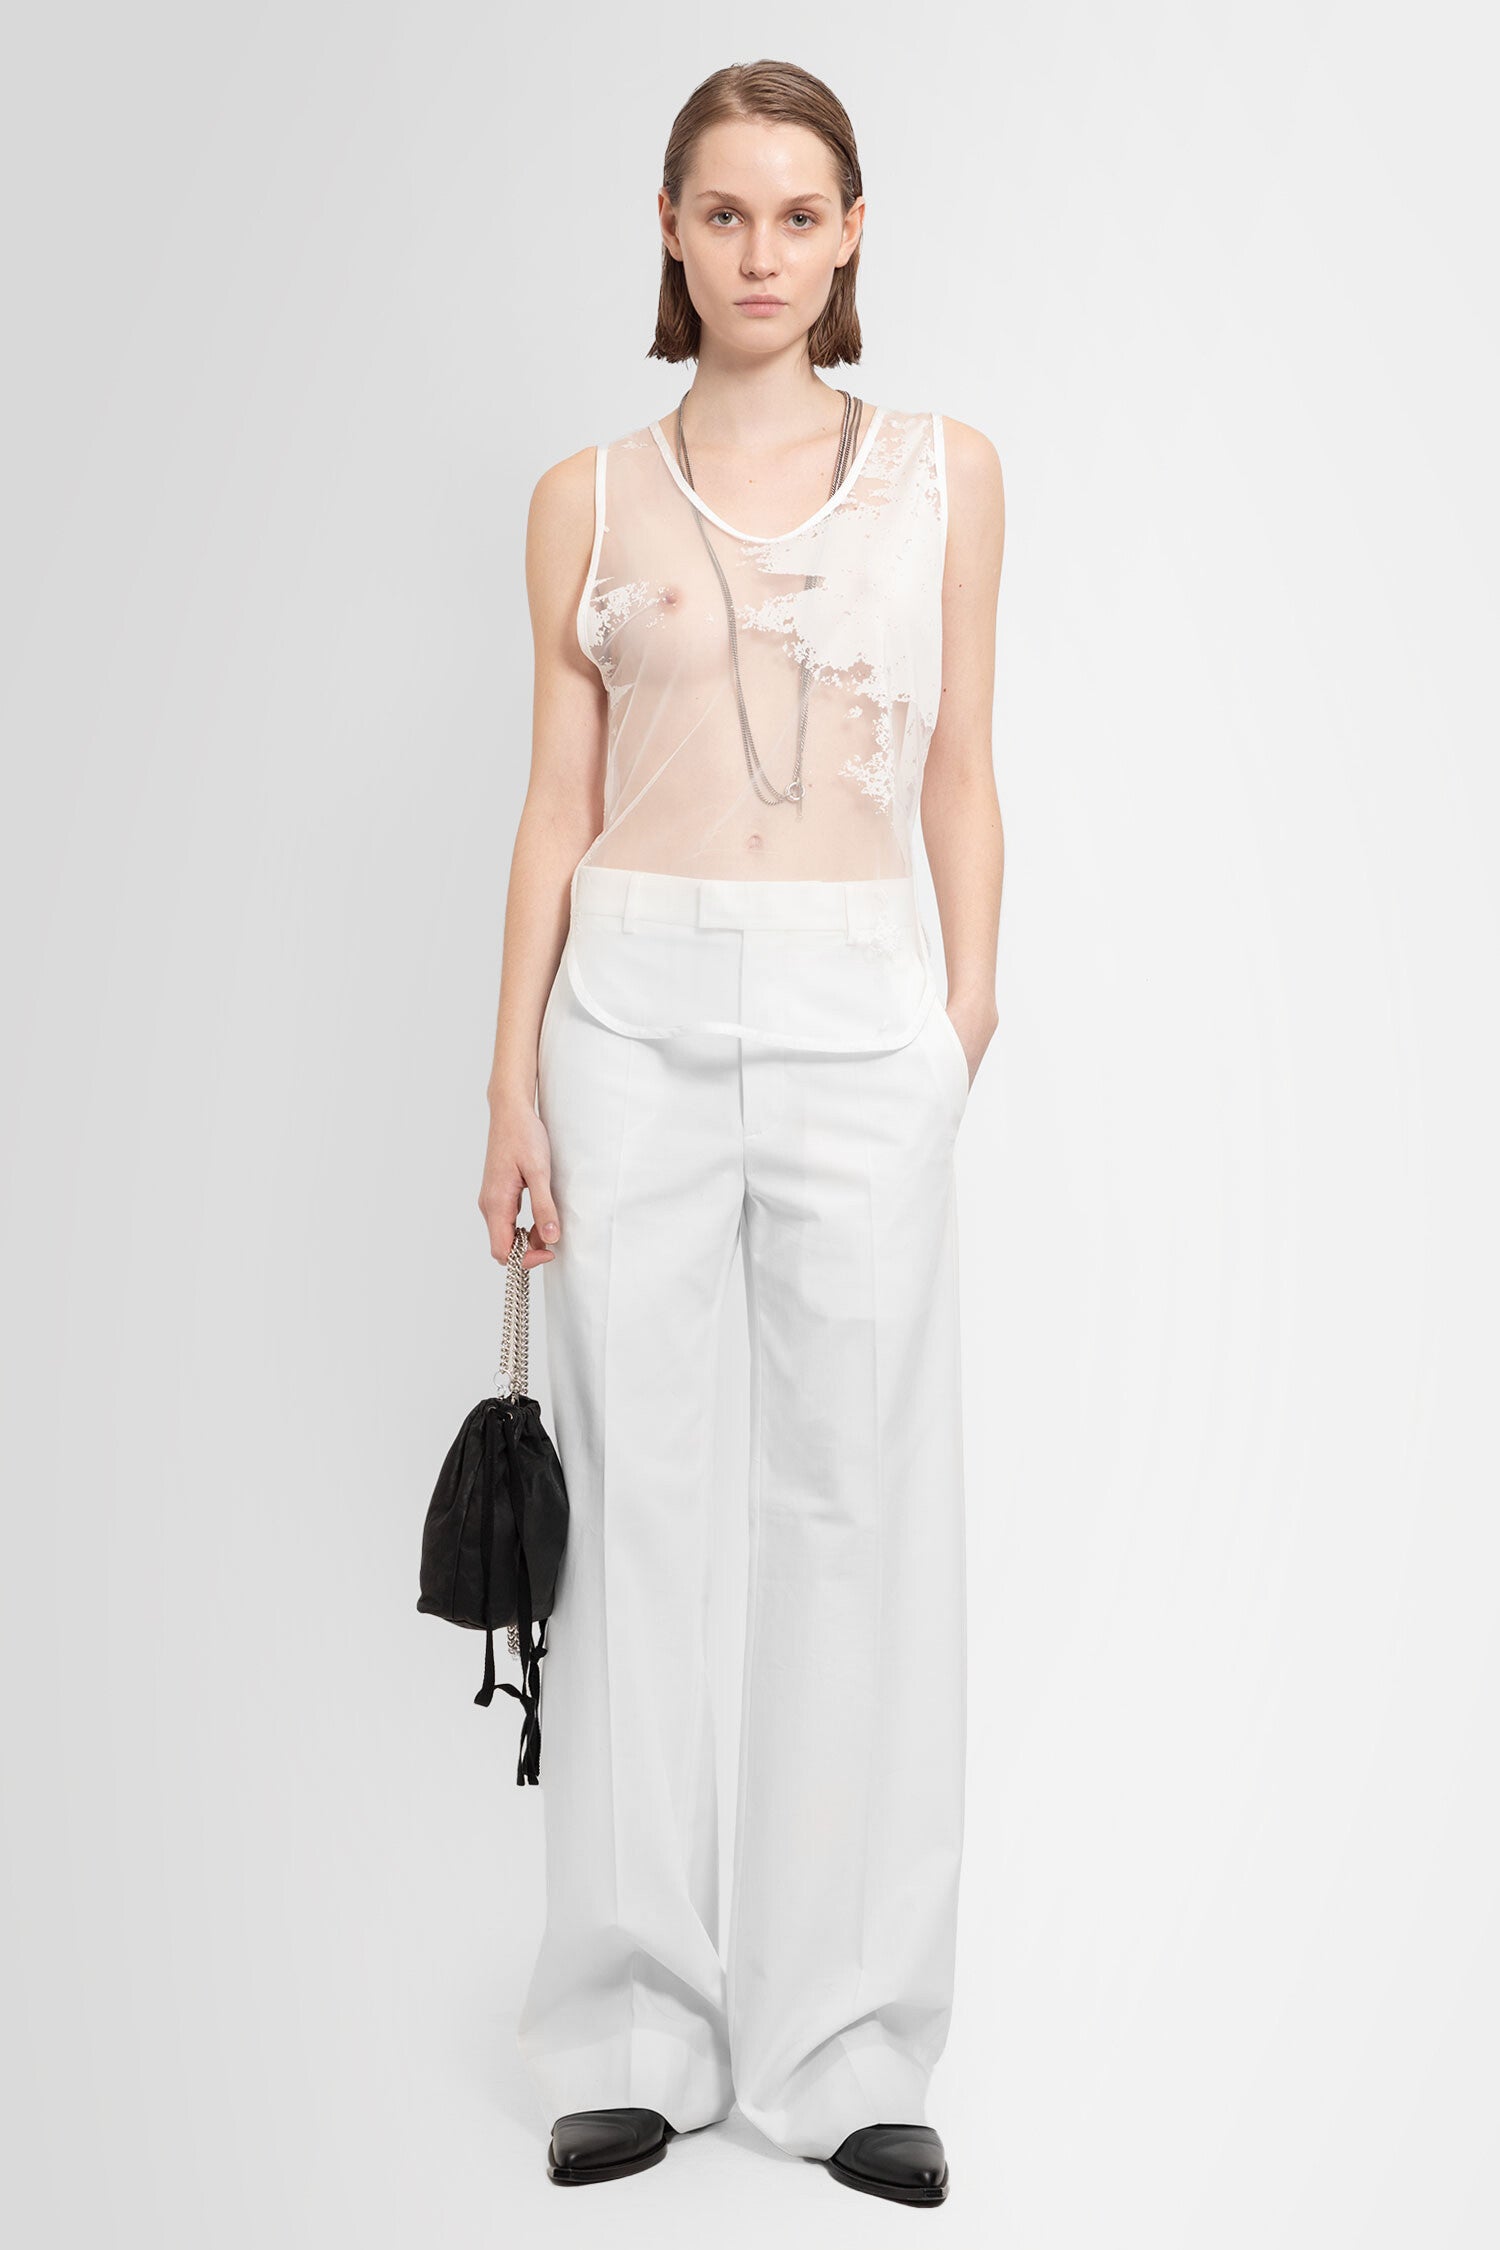 ANN DEMEULEMEESTER WOMAN WHITE TROUSERS